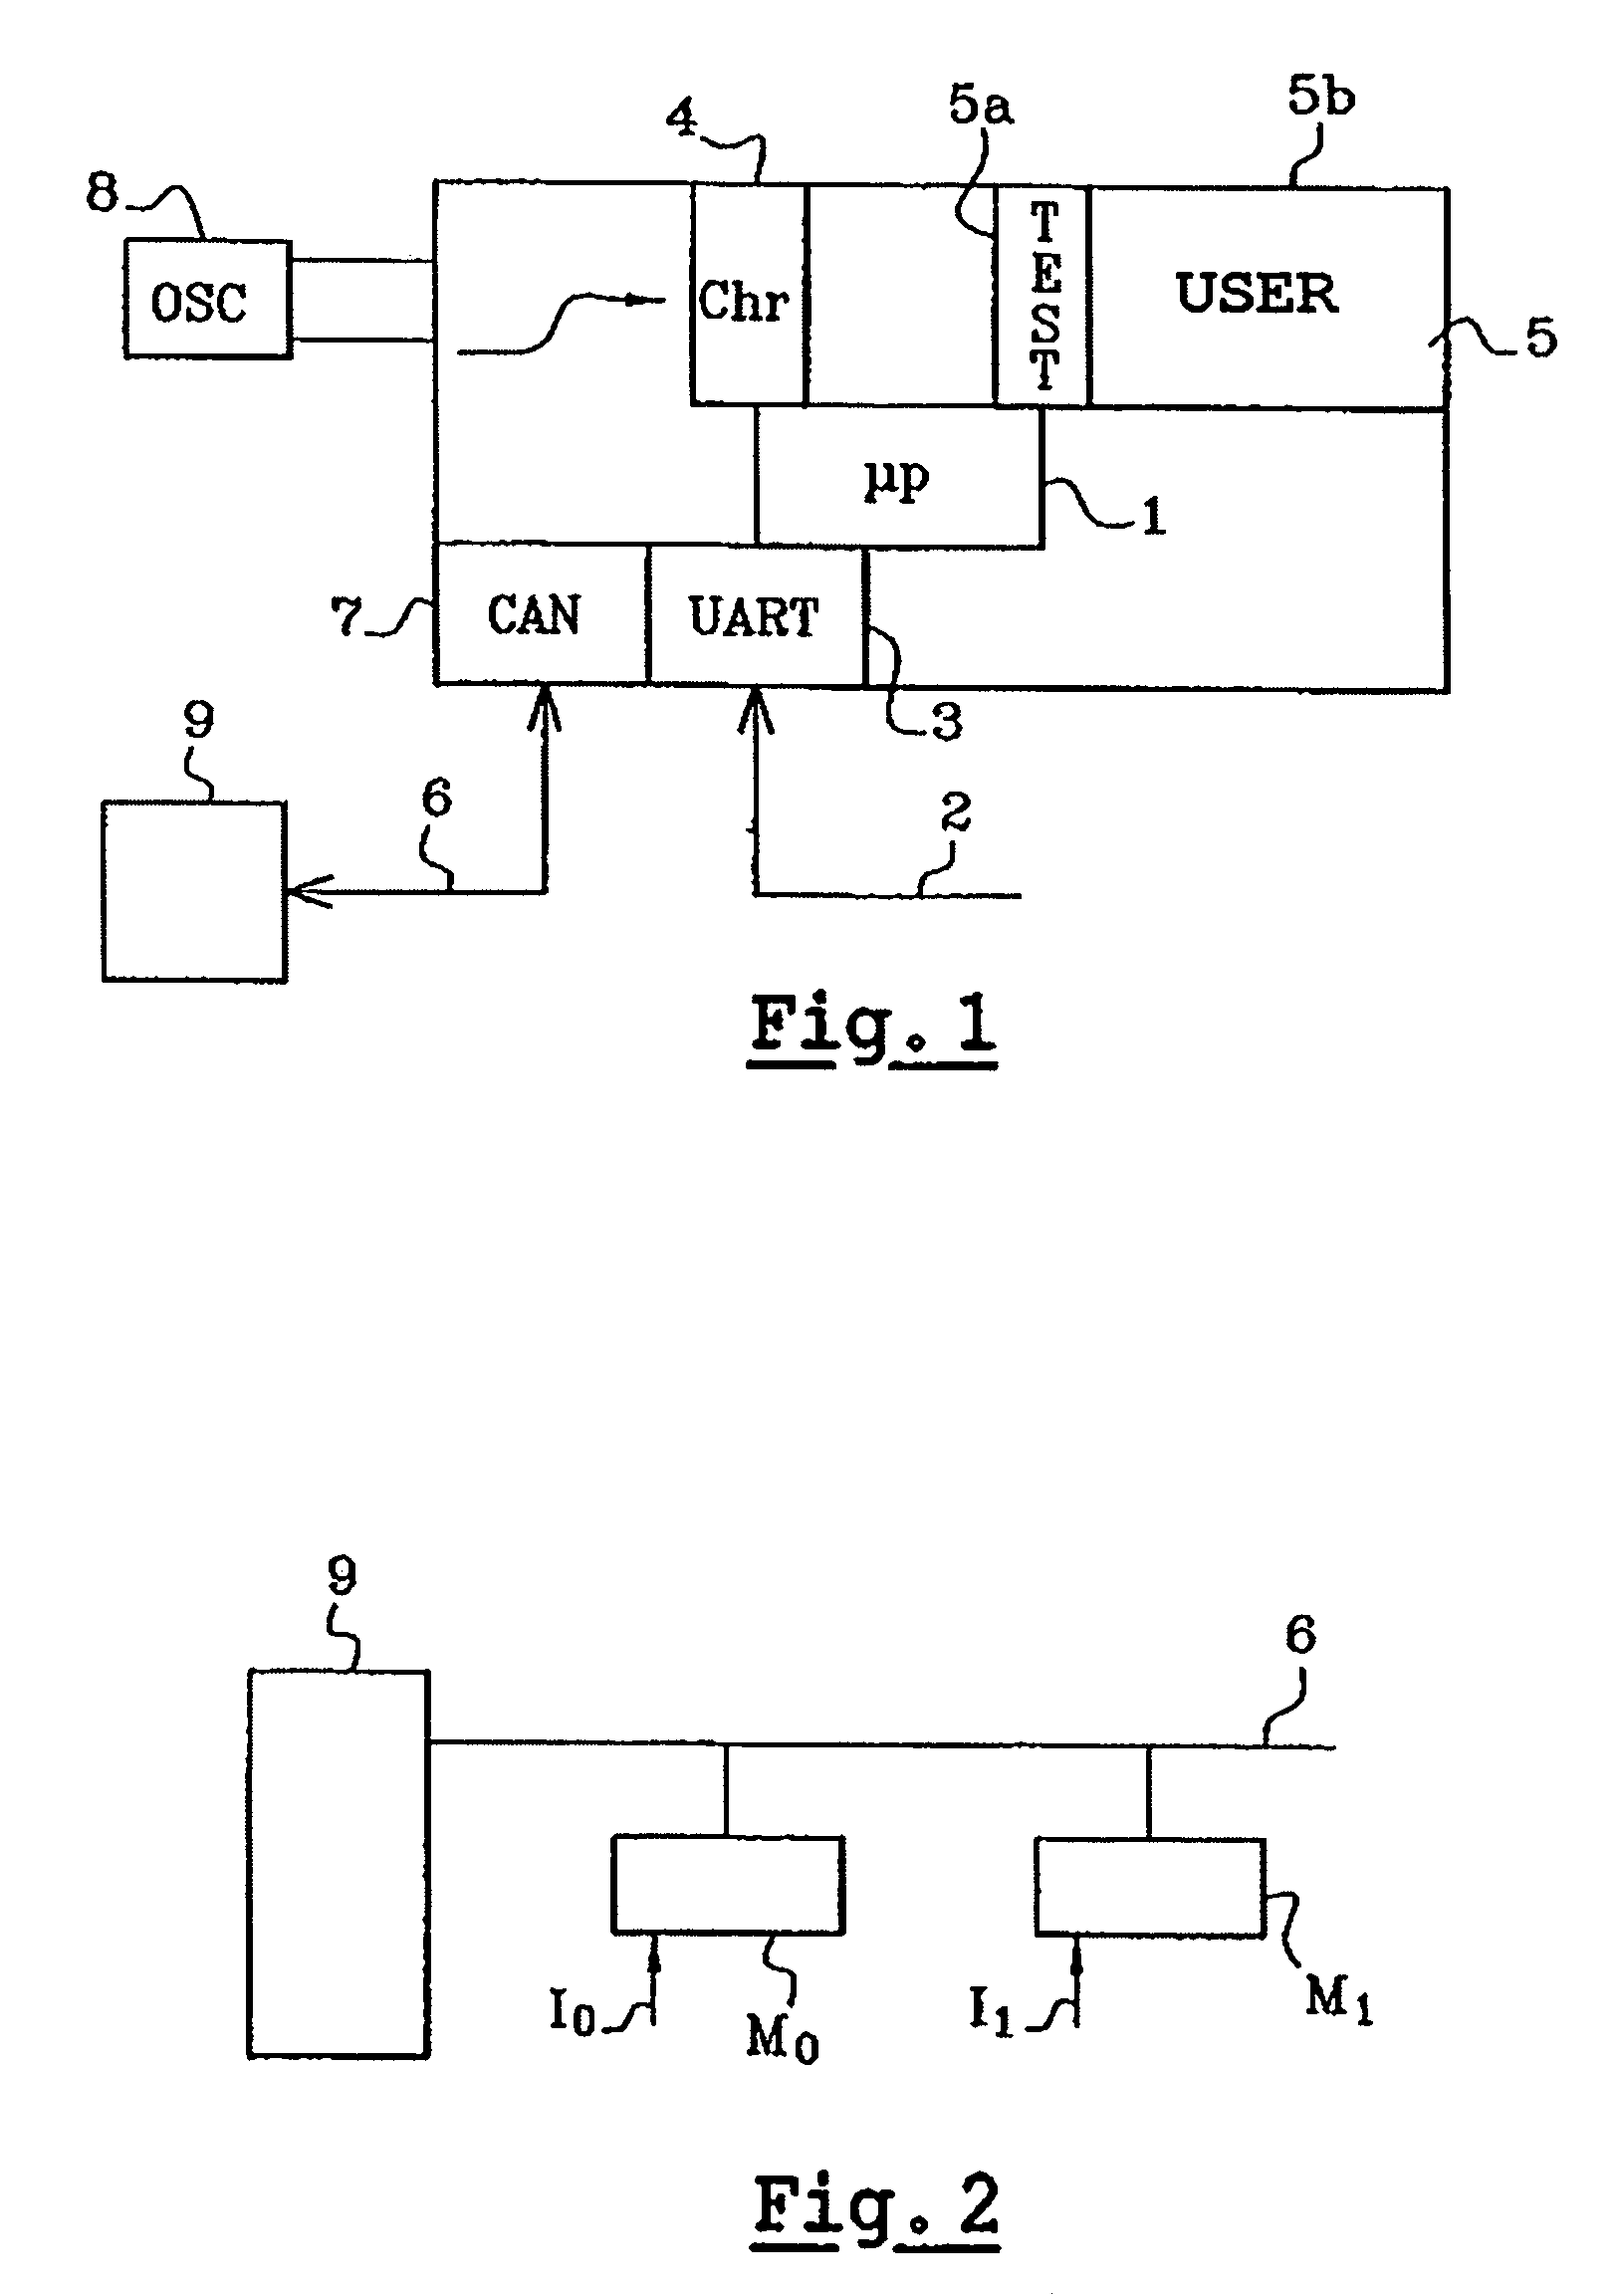 Method for programming/parallel programming of onboard flash memory by multiple access bus